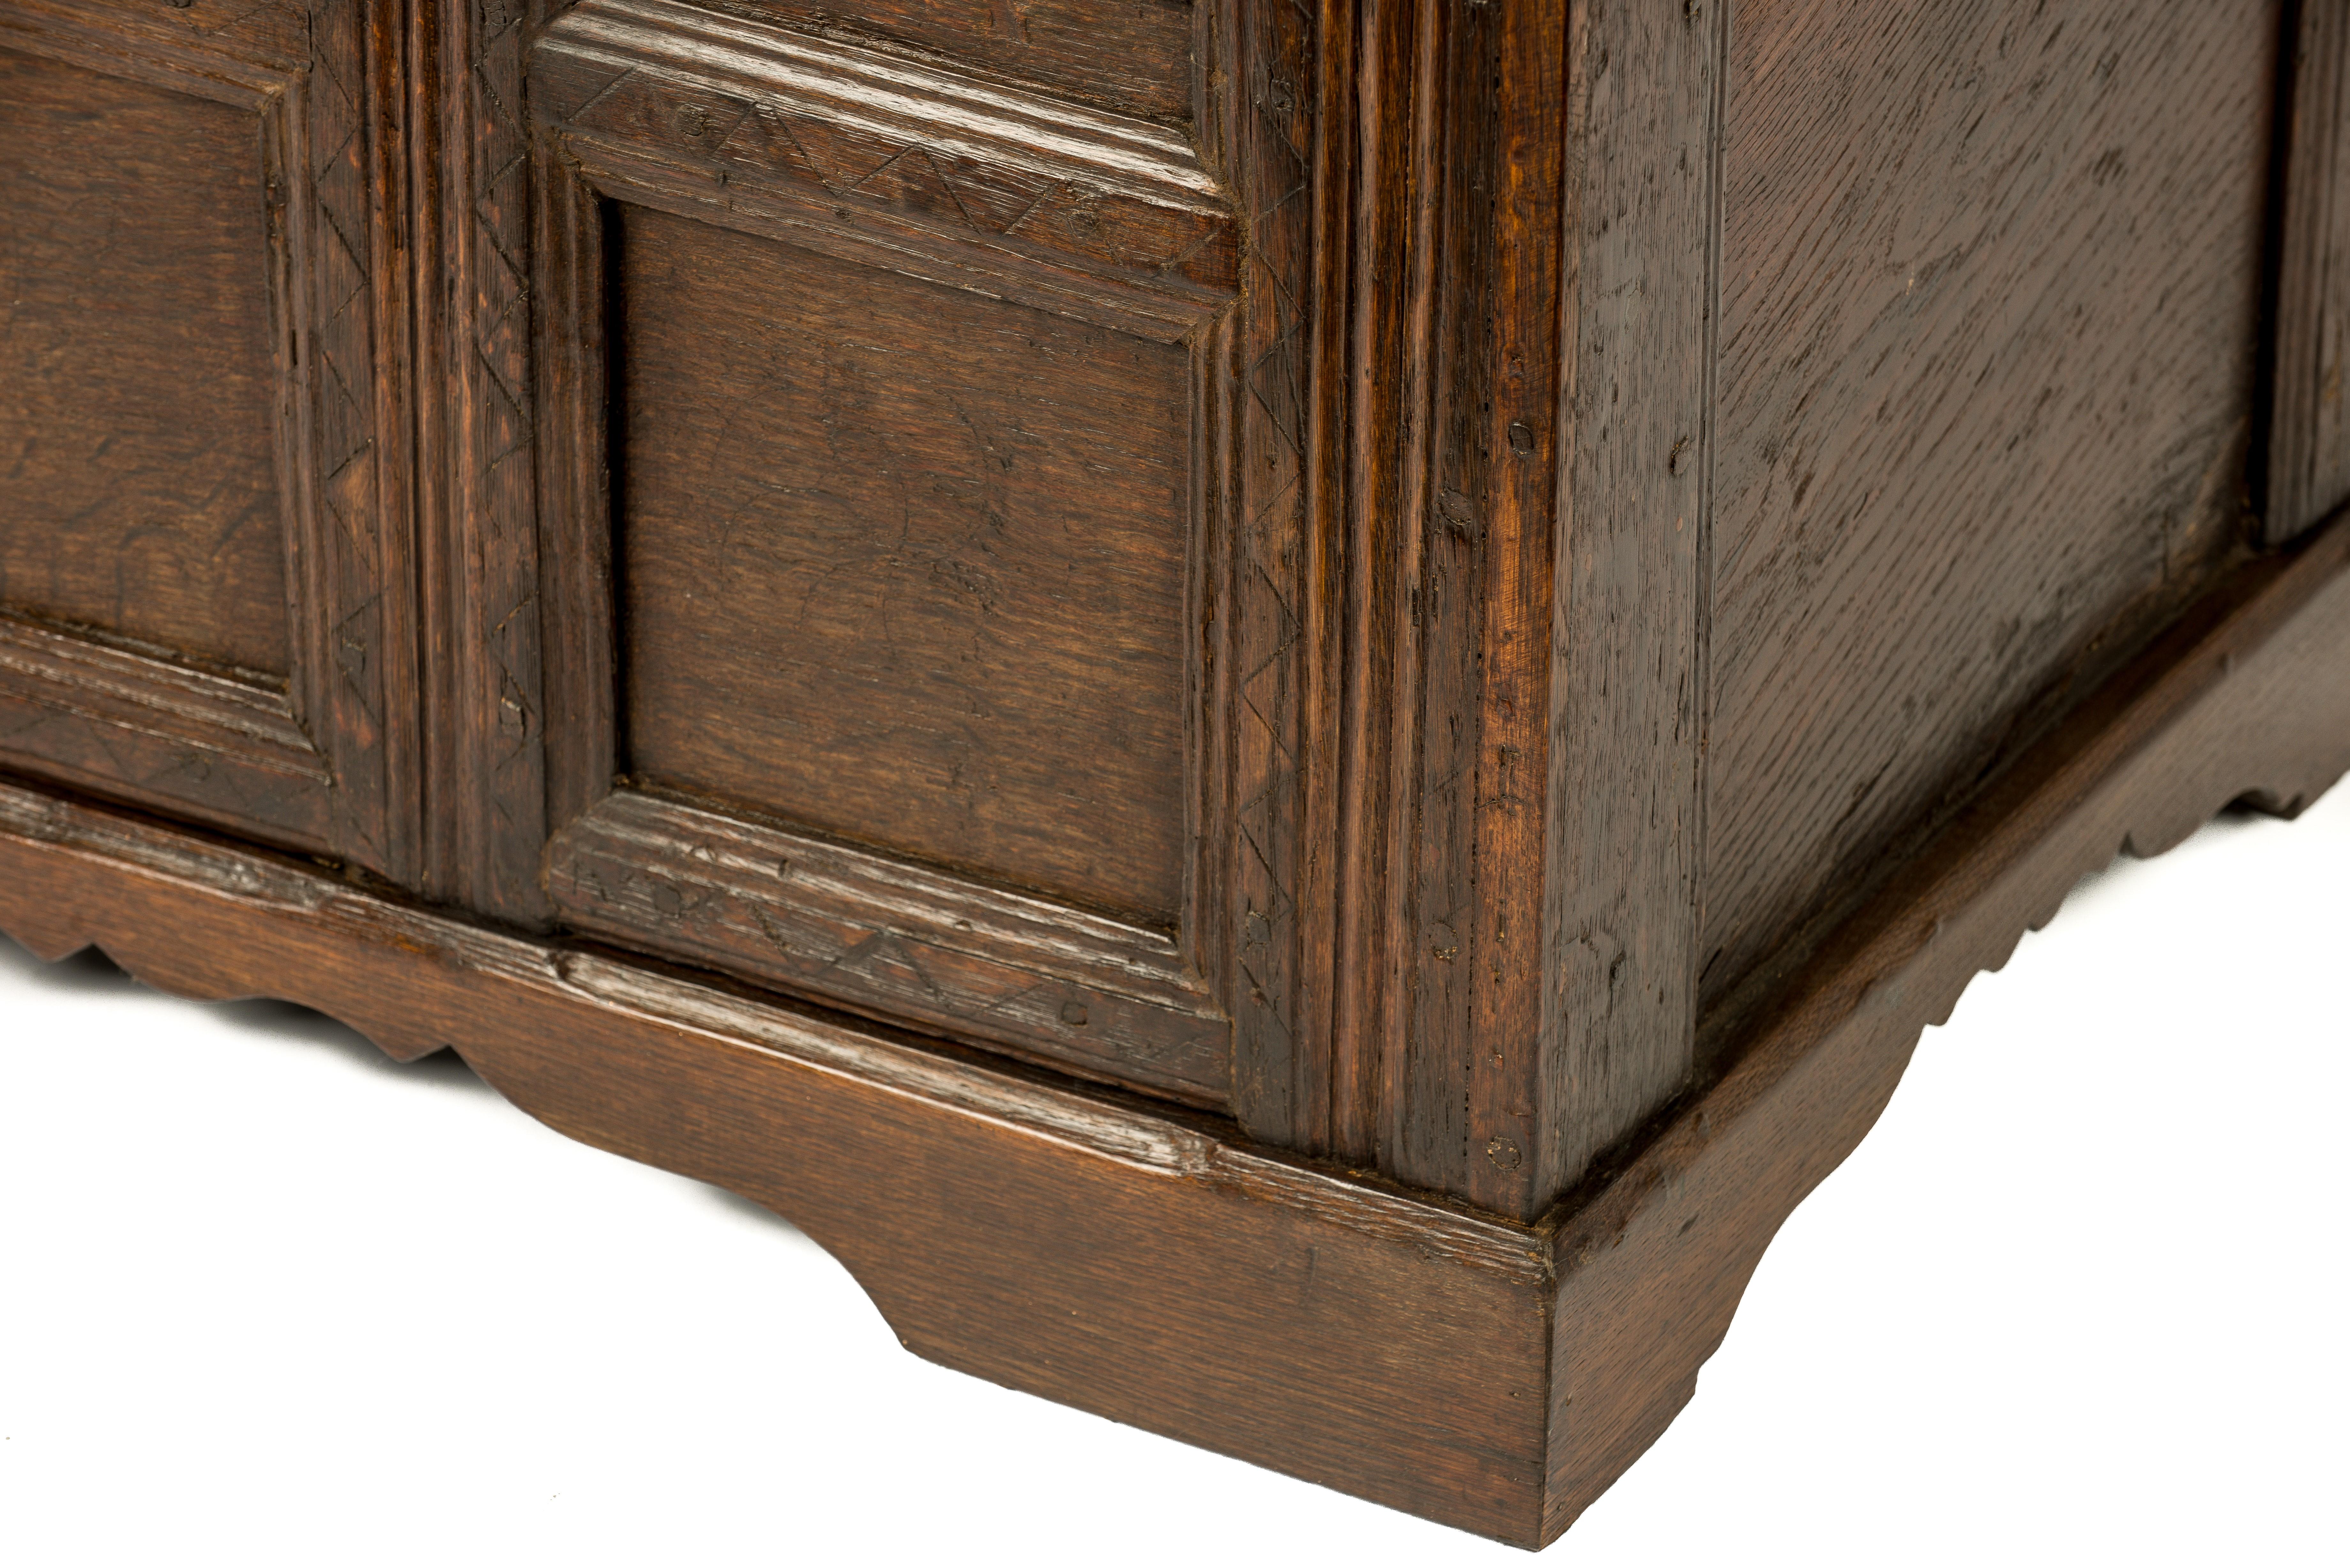 Antique Early 18th Century Warm Brown Paneled and Carved Oak Chest or Coffer For Sale 1